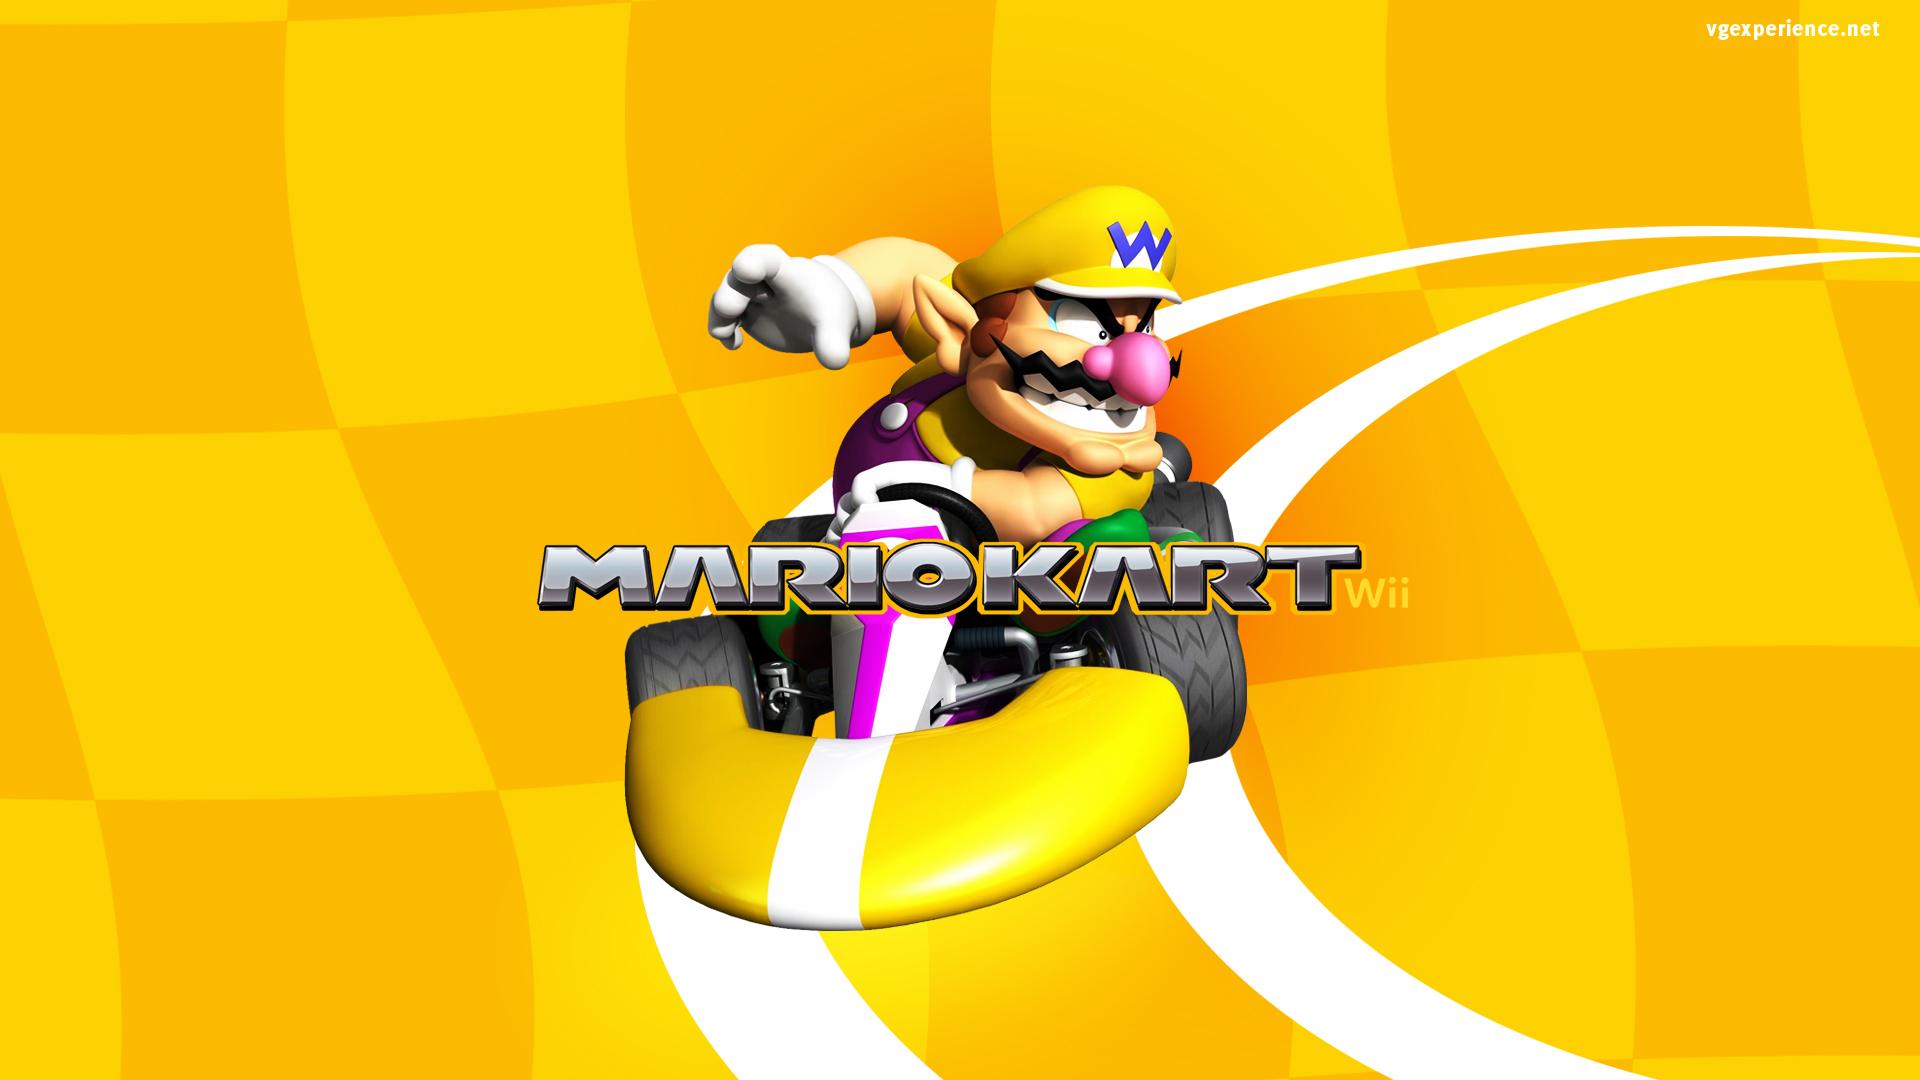 Mario Kart Wii HD Wallpaper and Background Image